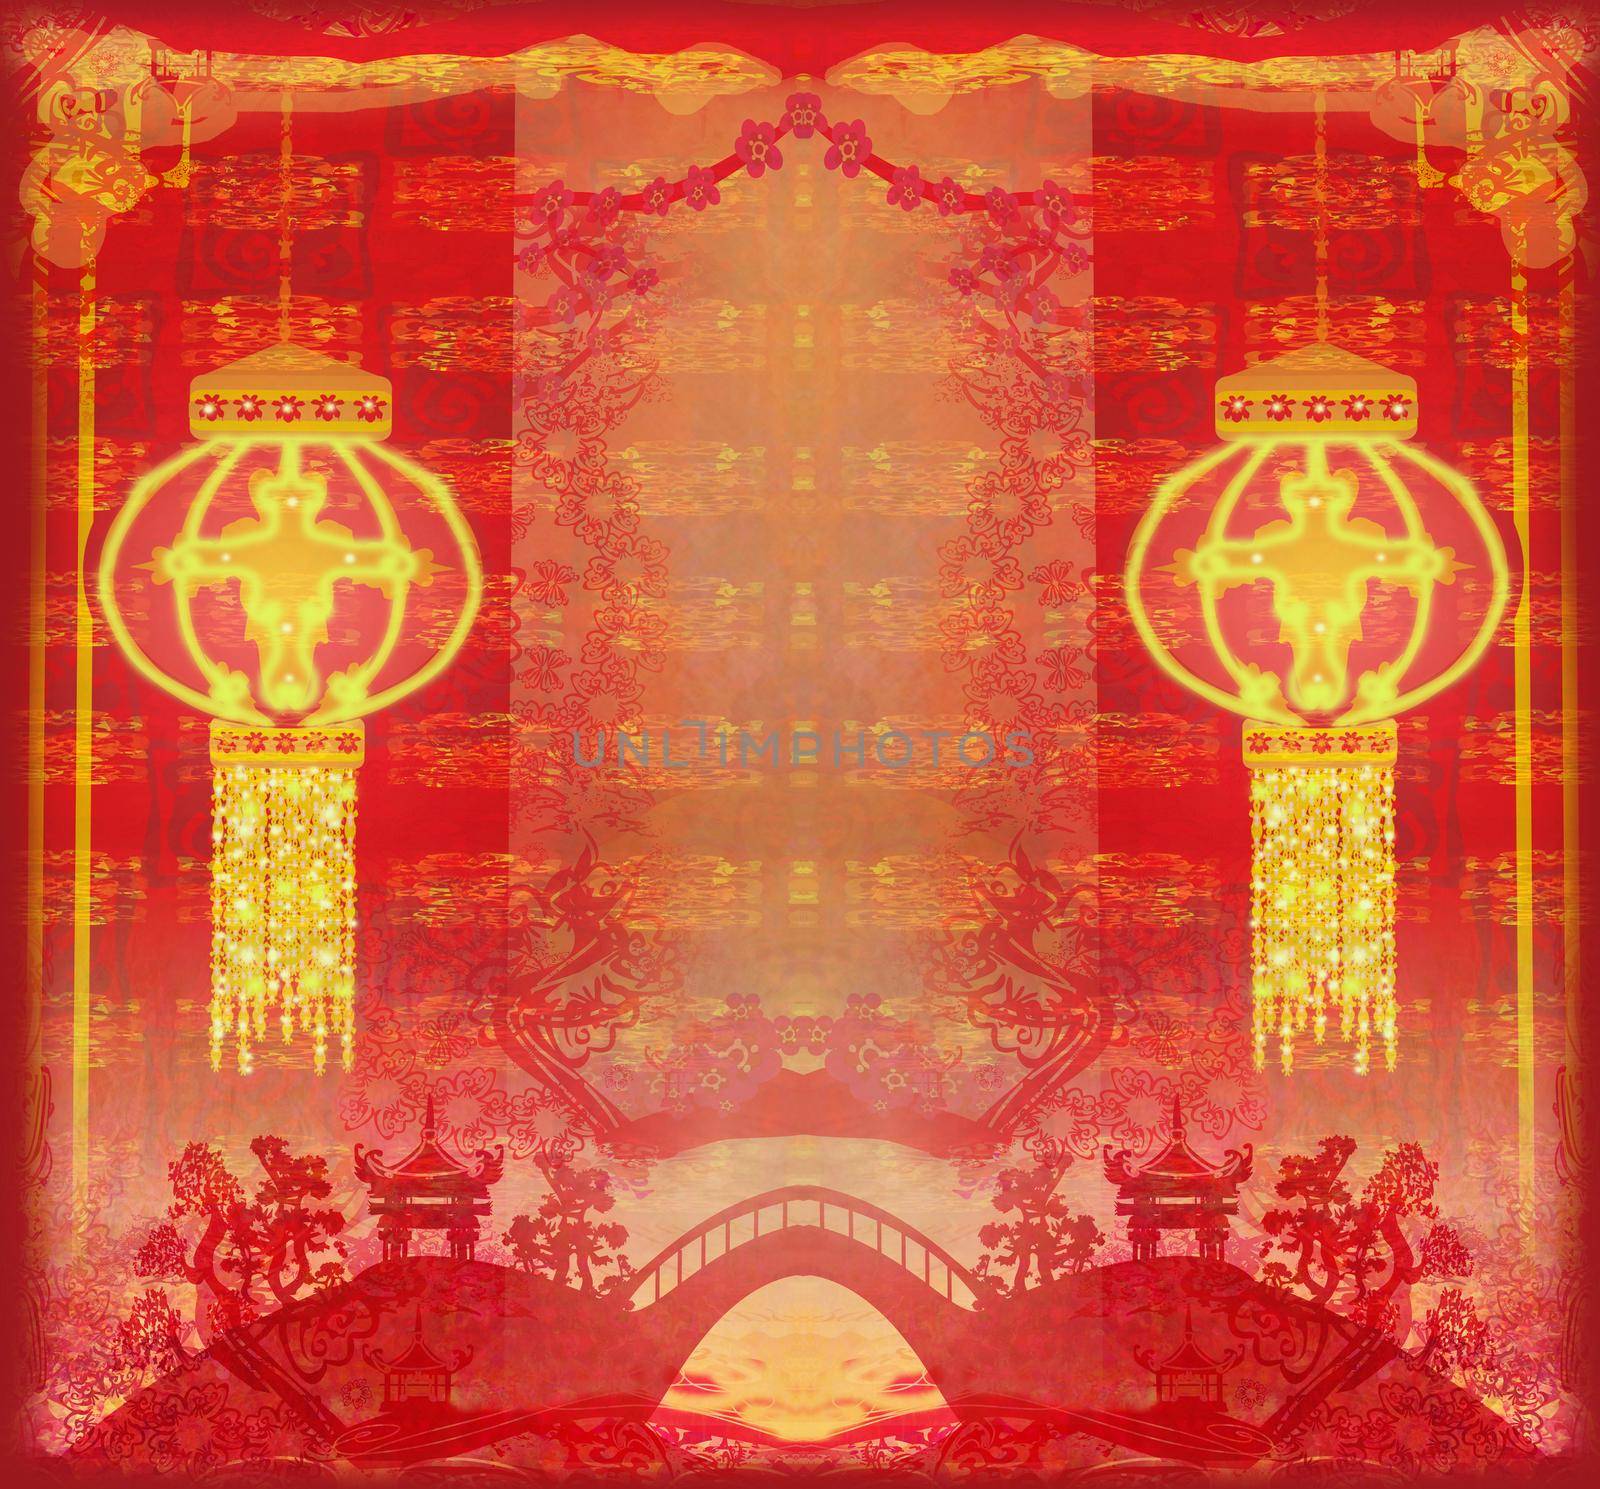 Chinese New Year card - Traditional lanterns and Asian buildings by JackyBrown